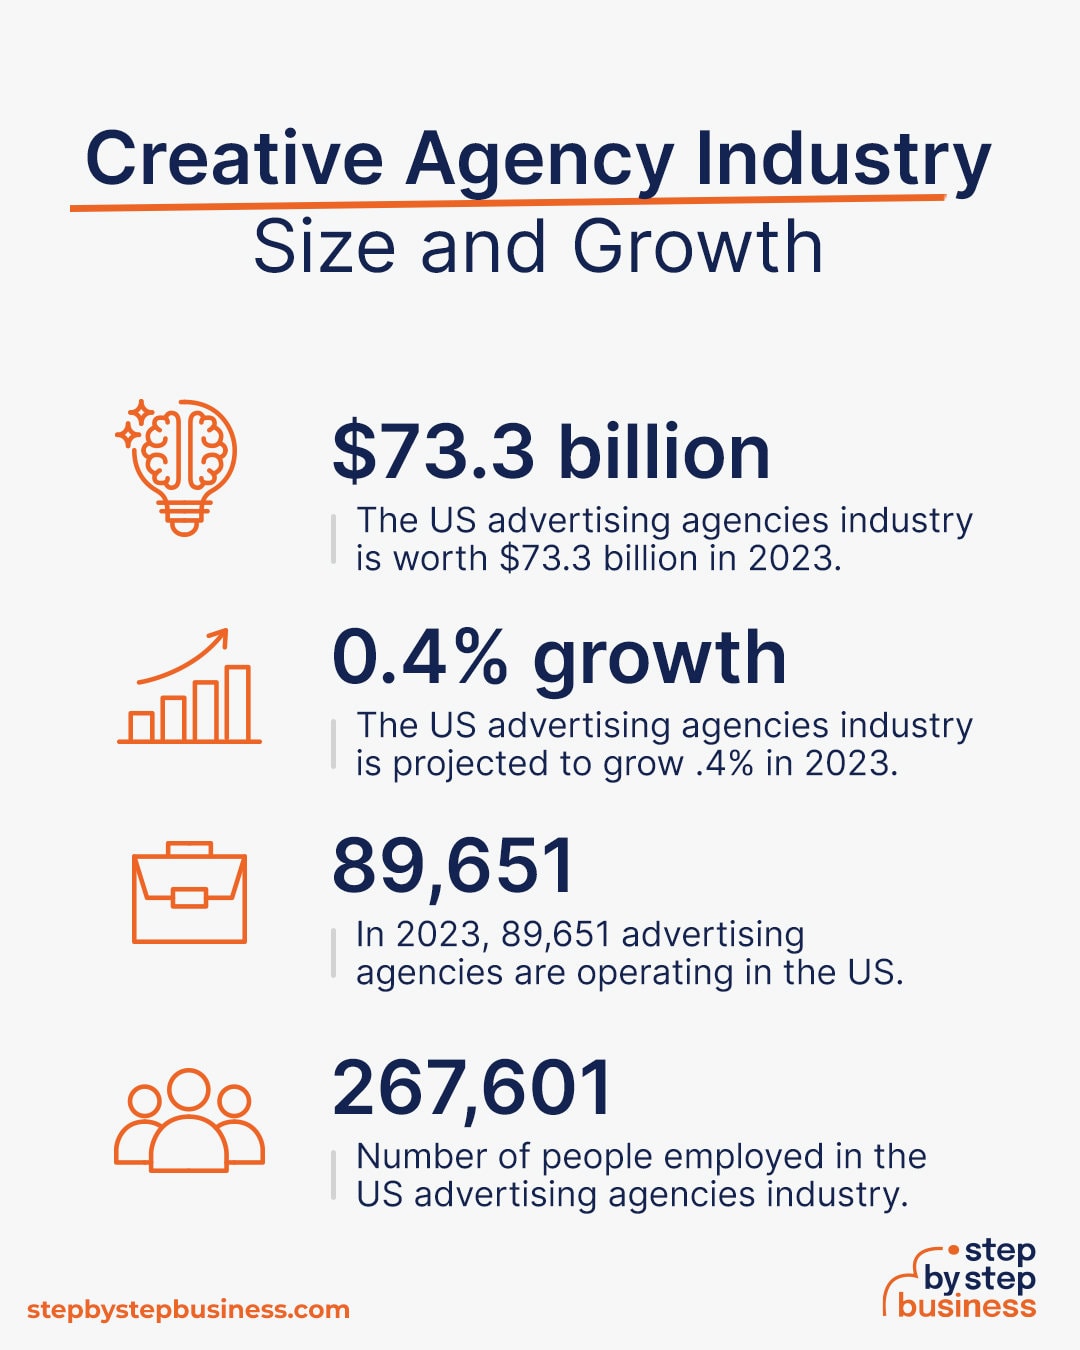 Creative Agency industry size and growth